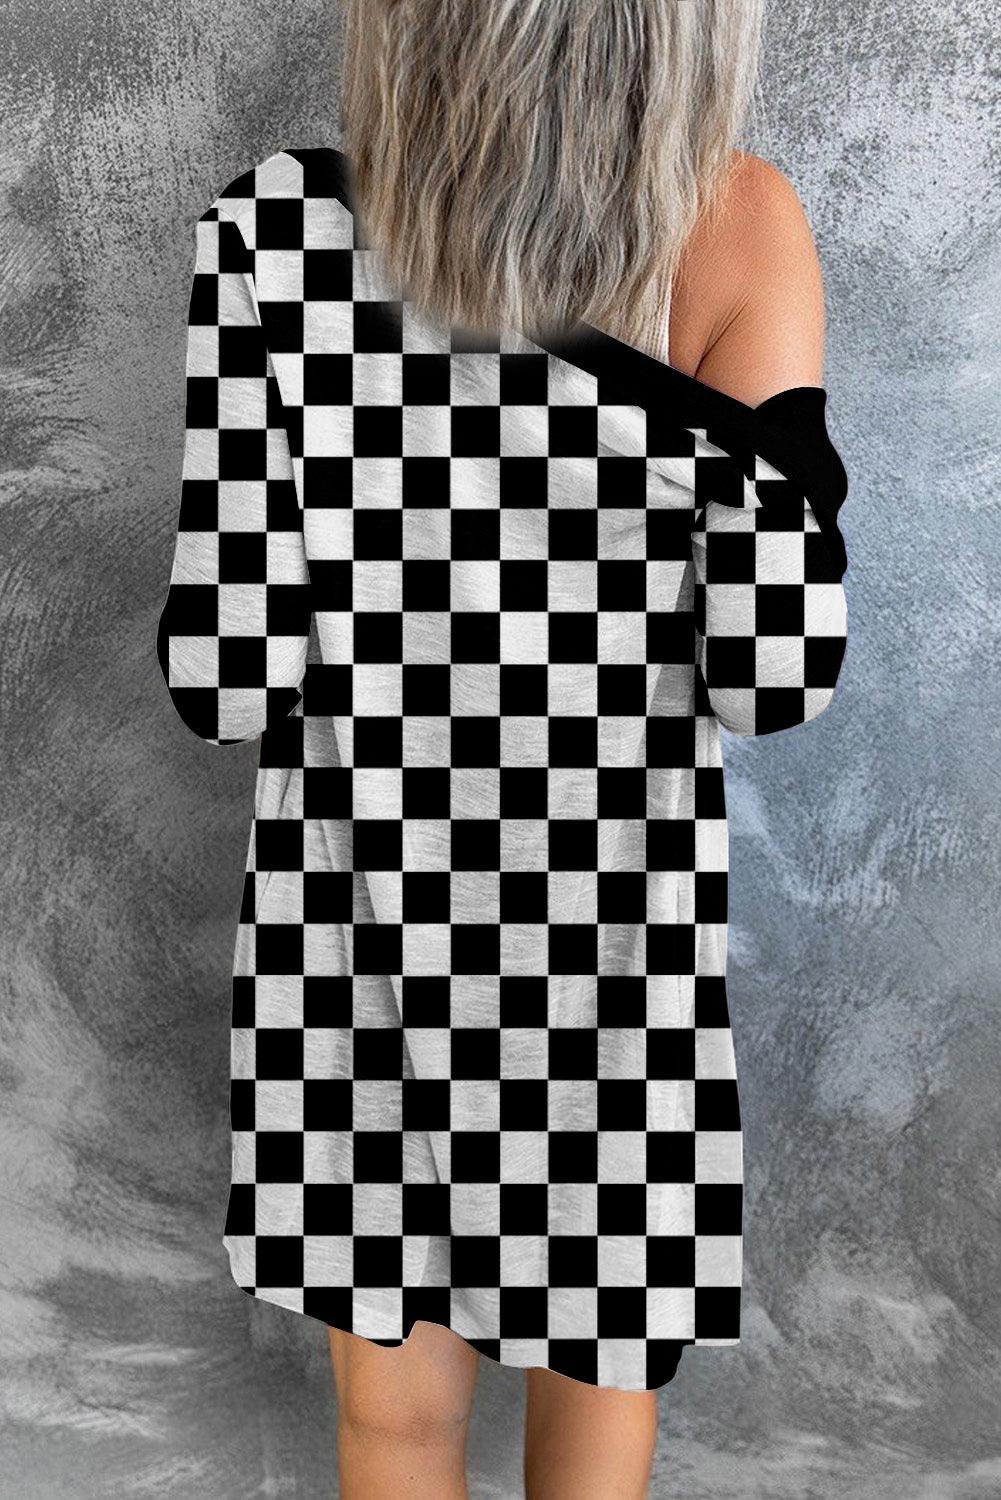 a woman wearing a black and white checkered dress